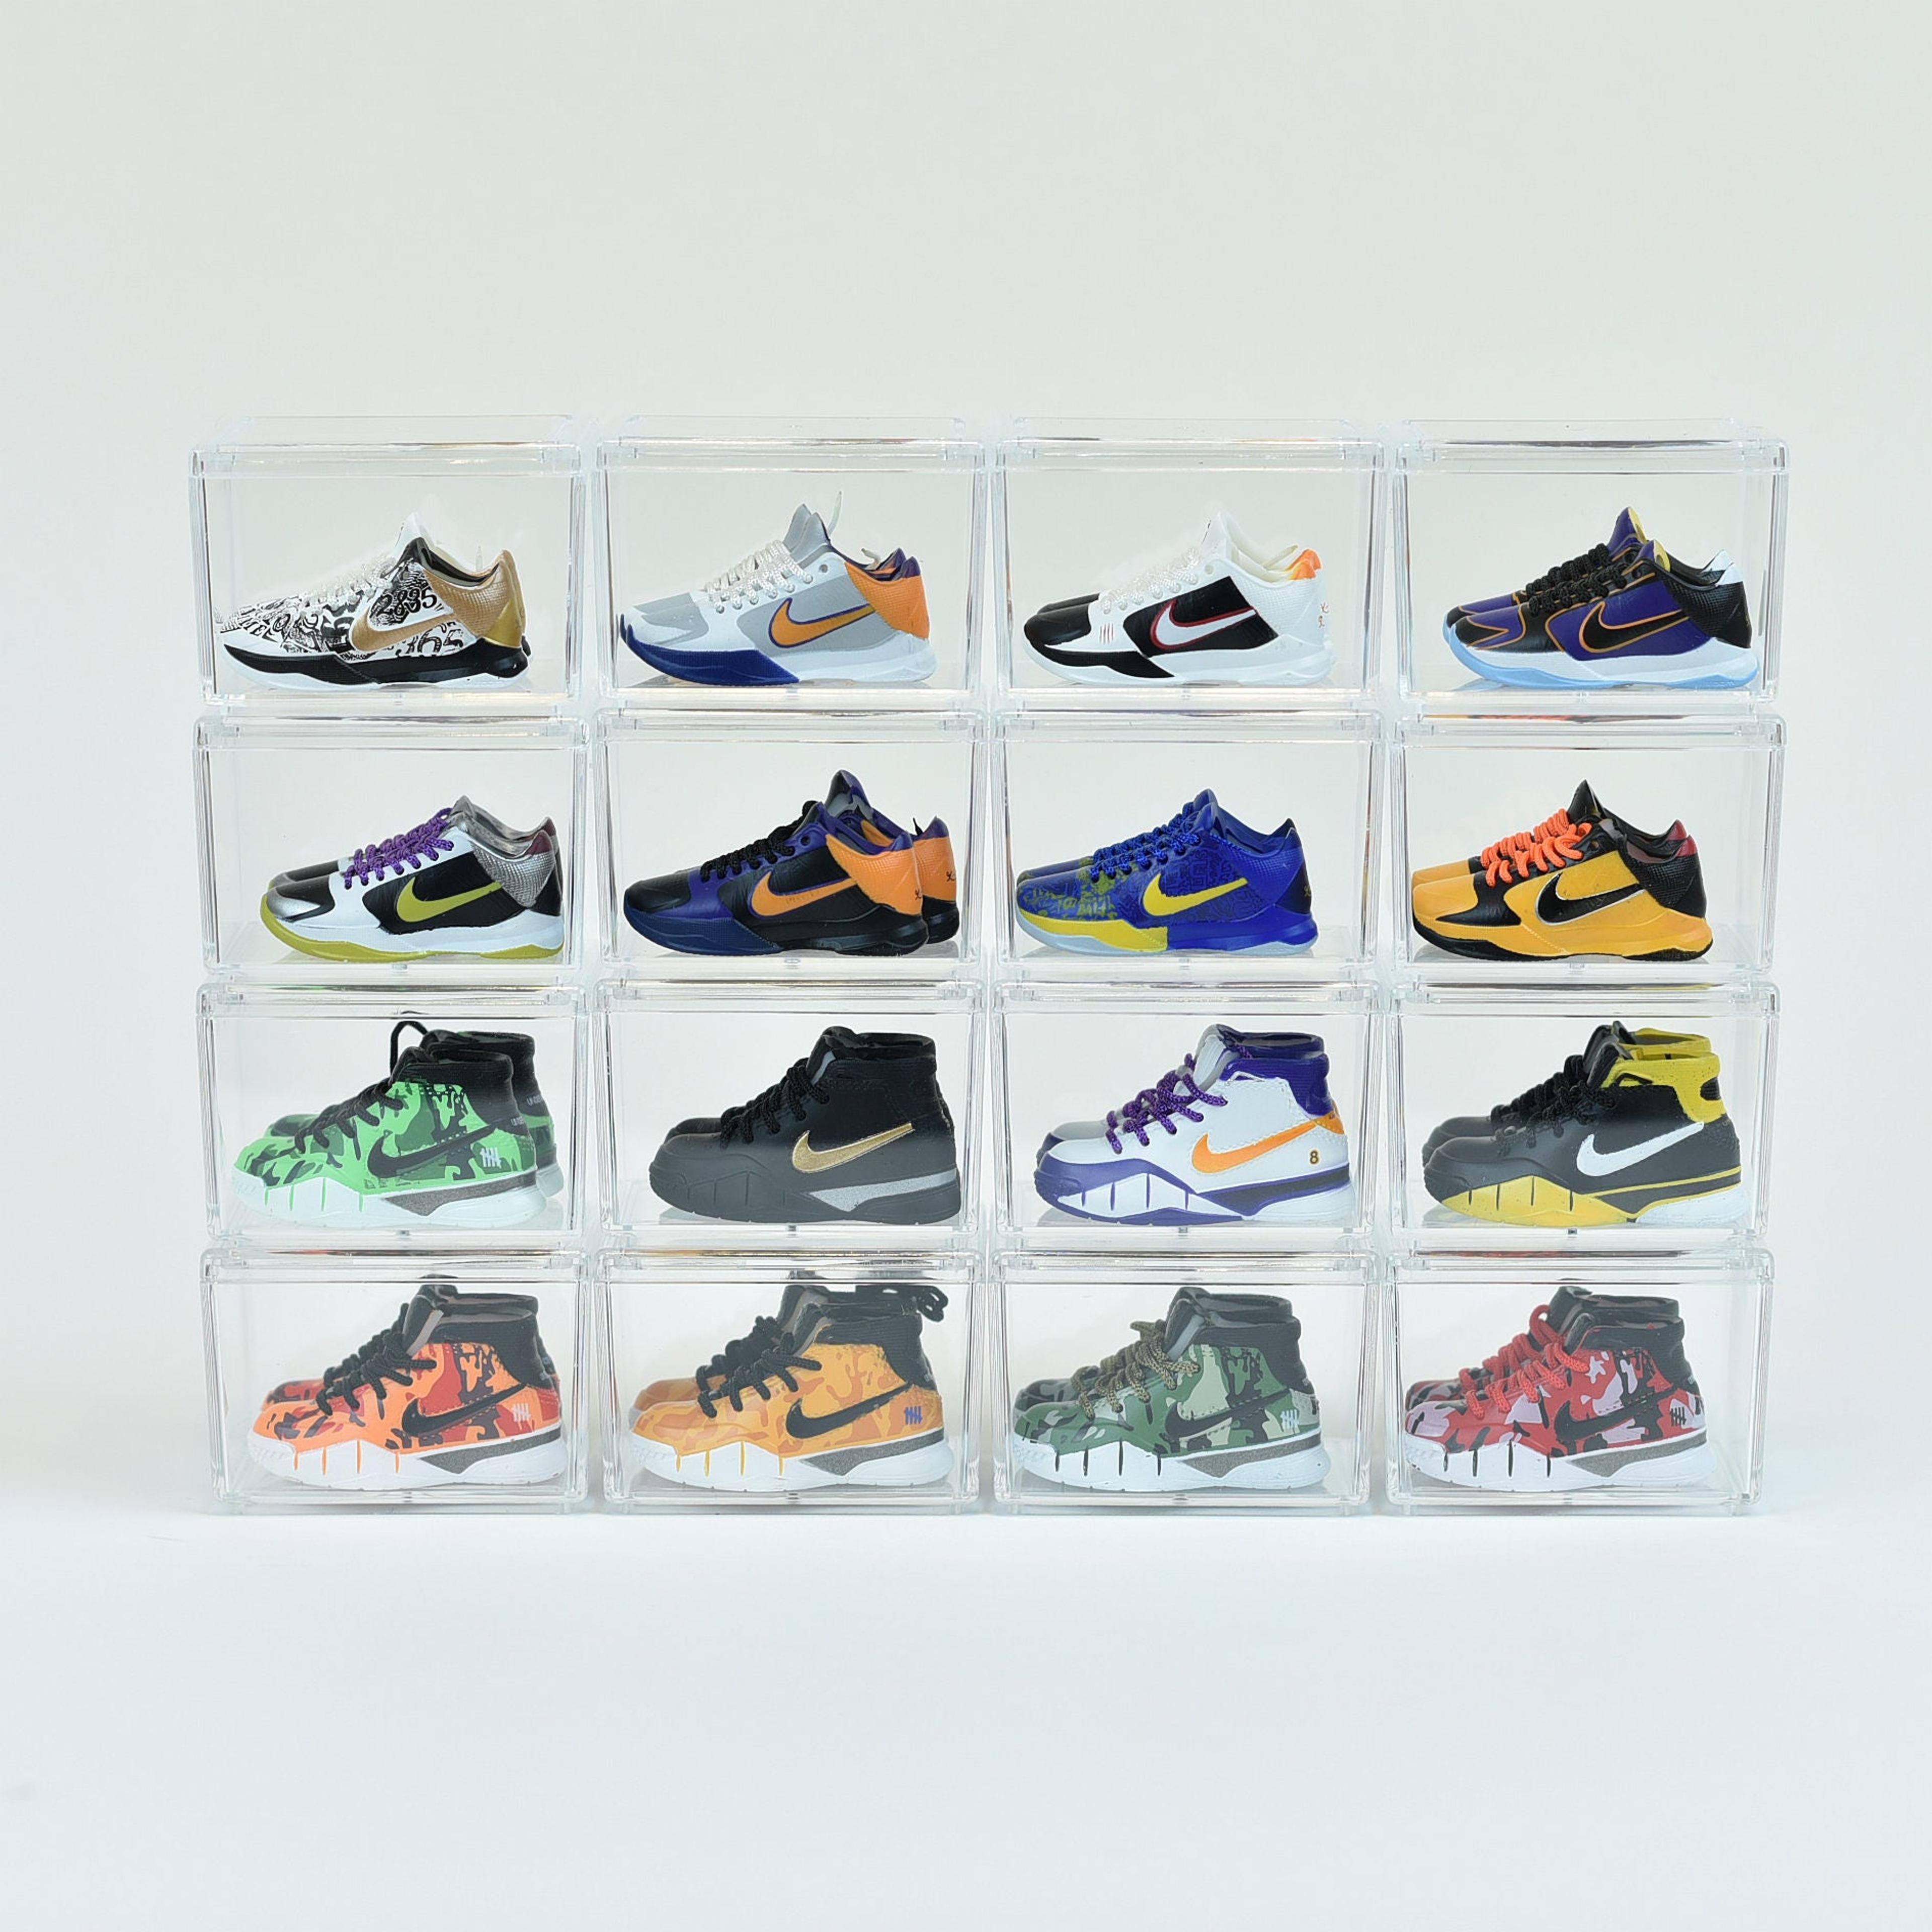 Alternate View 1 of Kobe Bryant/LeBron James/Steph Curry Mini Sneaker Collection wit